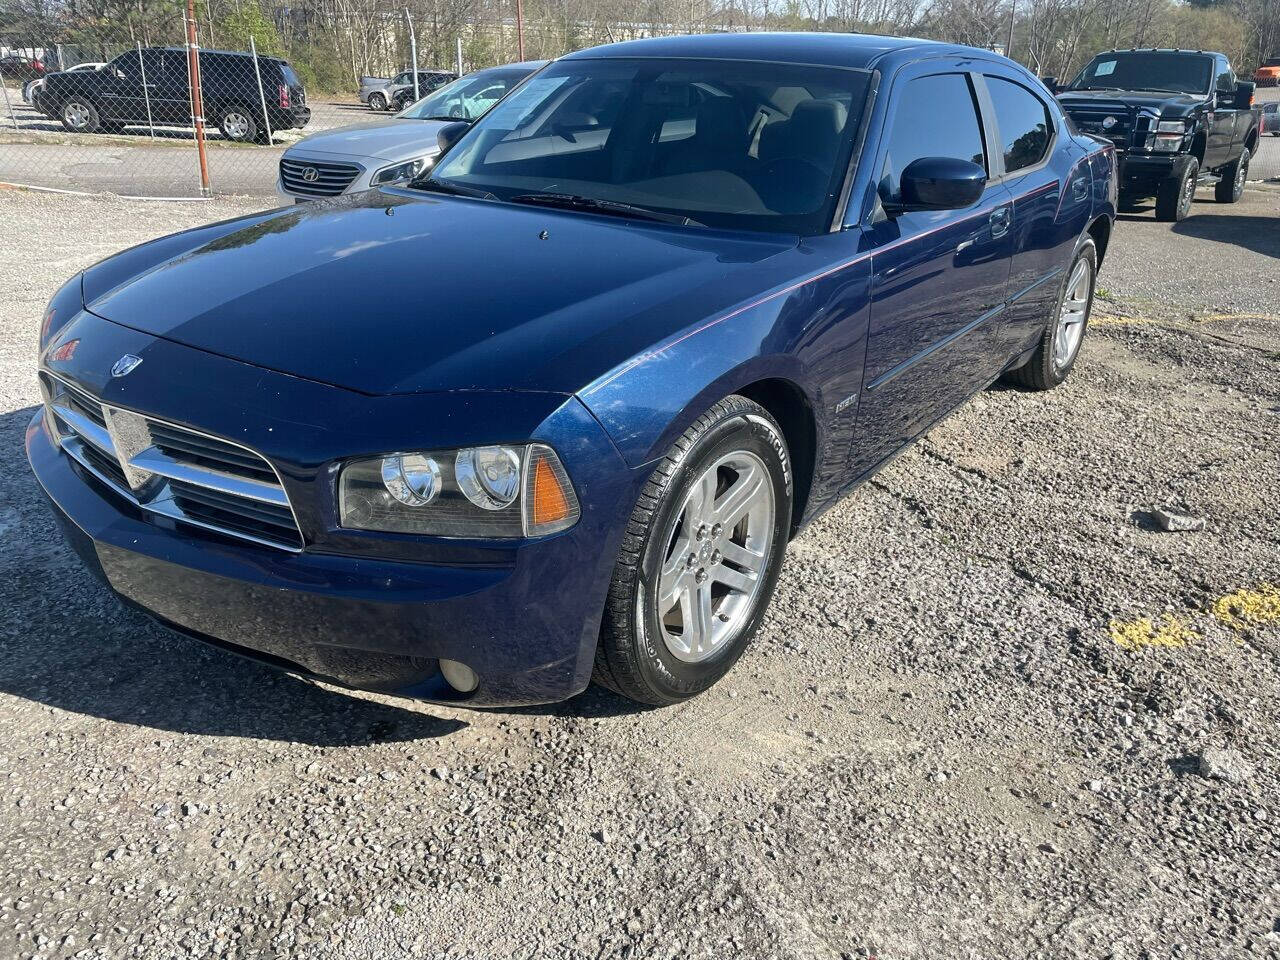 2006 Dodge Charger For Sale In Georgia ®